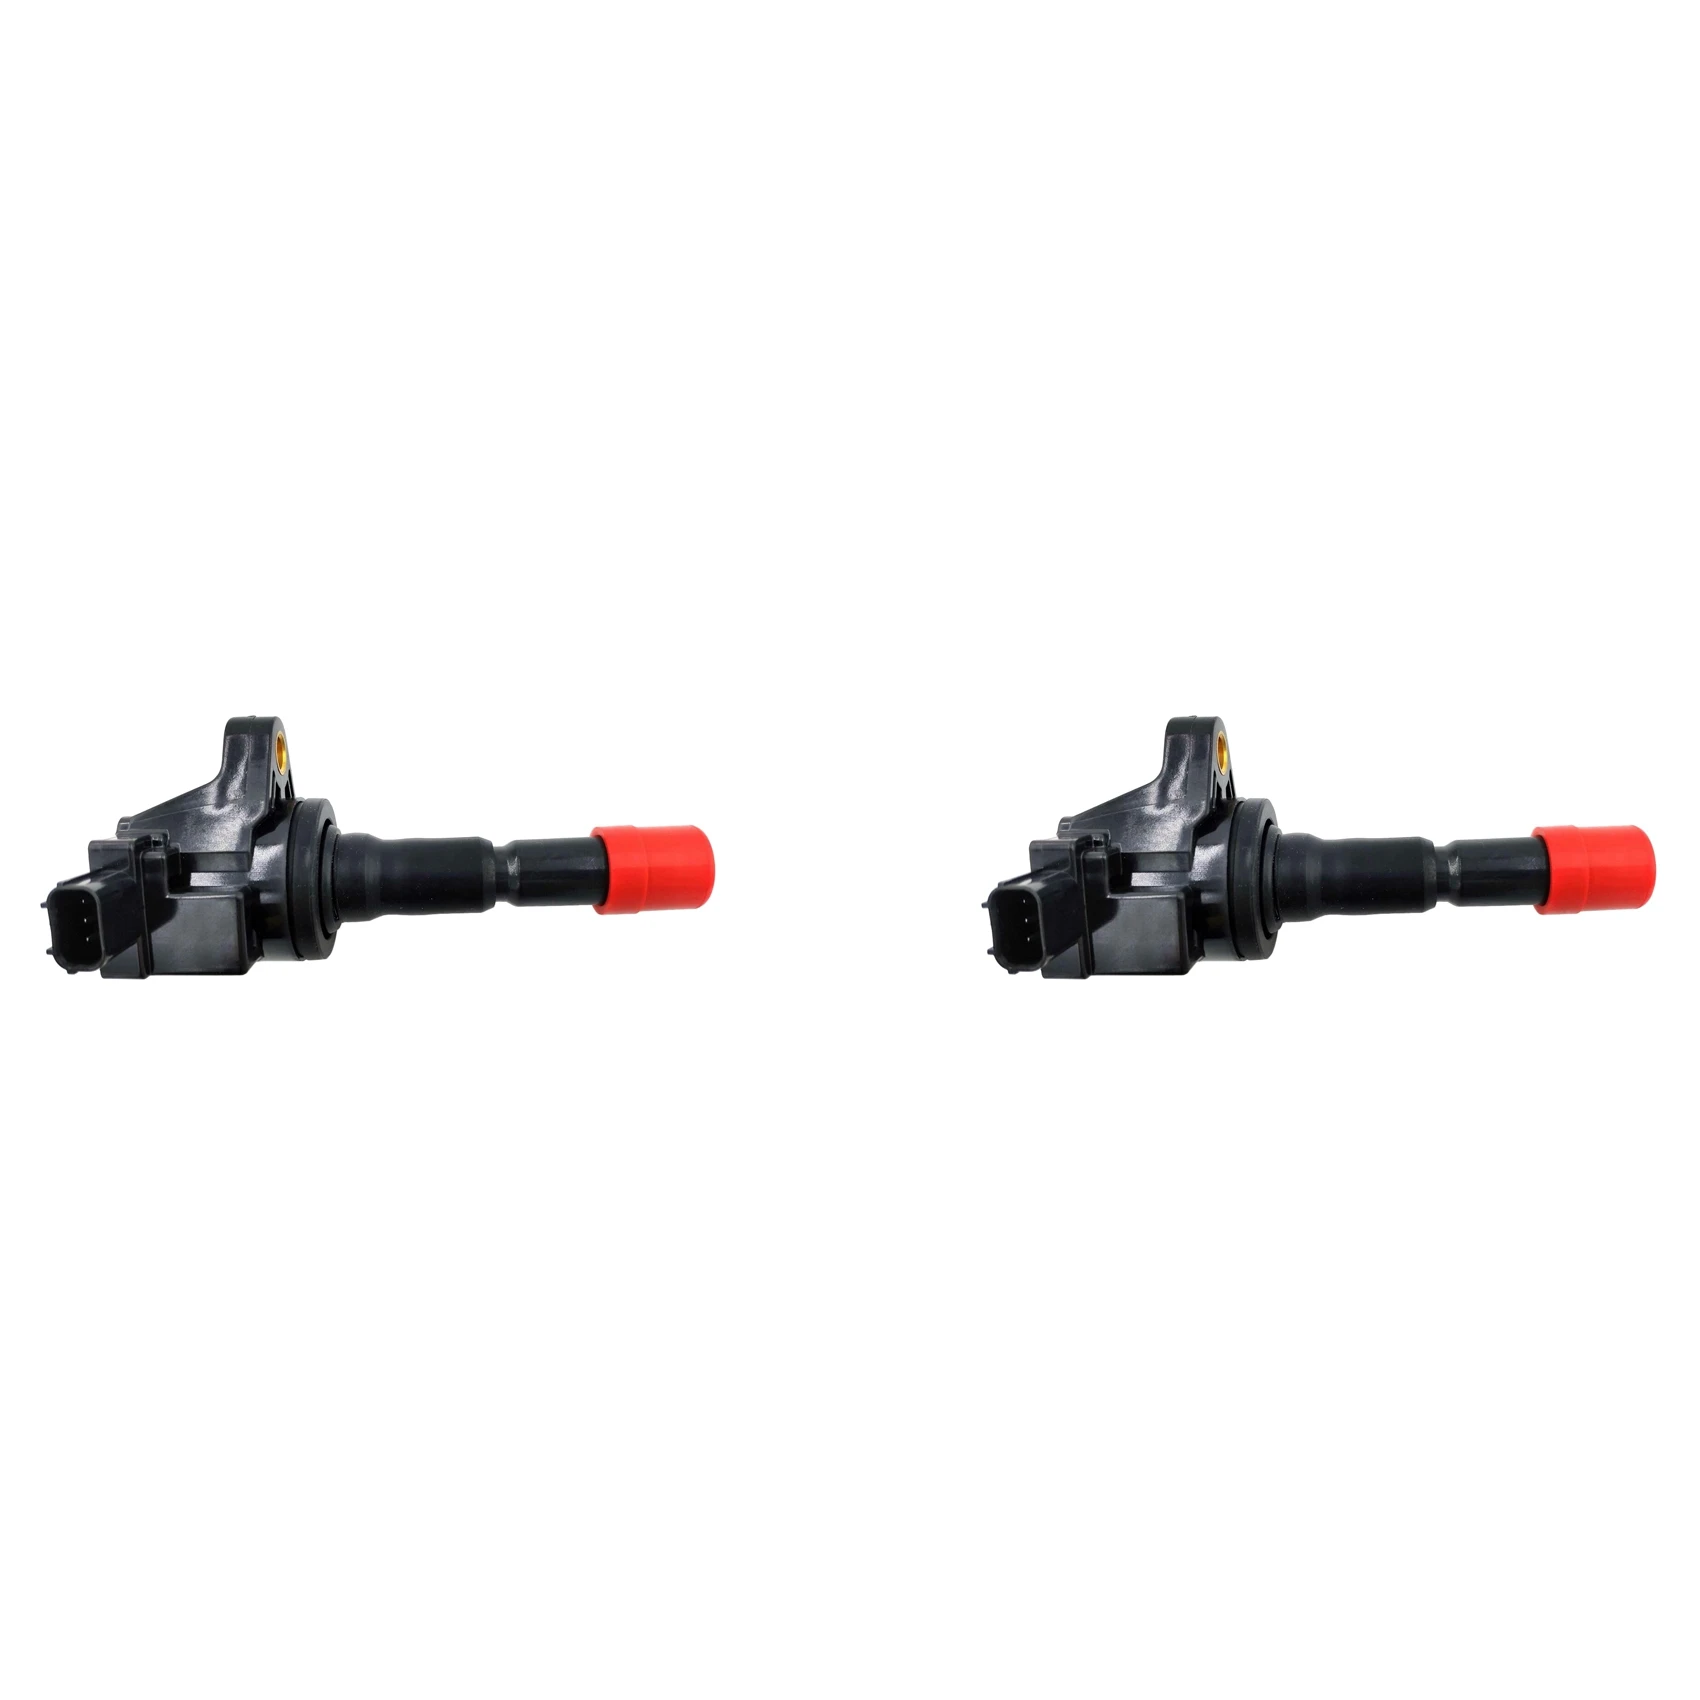 

2X Ignition Coil 30520-RB0 -S01 30520-RB0-003 for Honda CR-Z CITY Fit UF626 C1664 30520-RBO-S01 30520-RBO-003 CM11-116